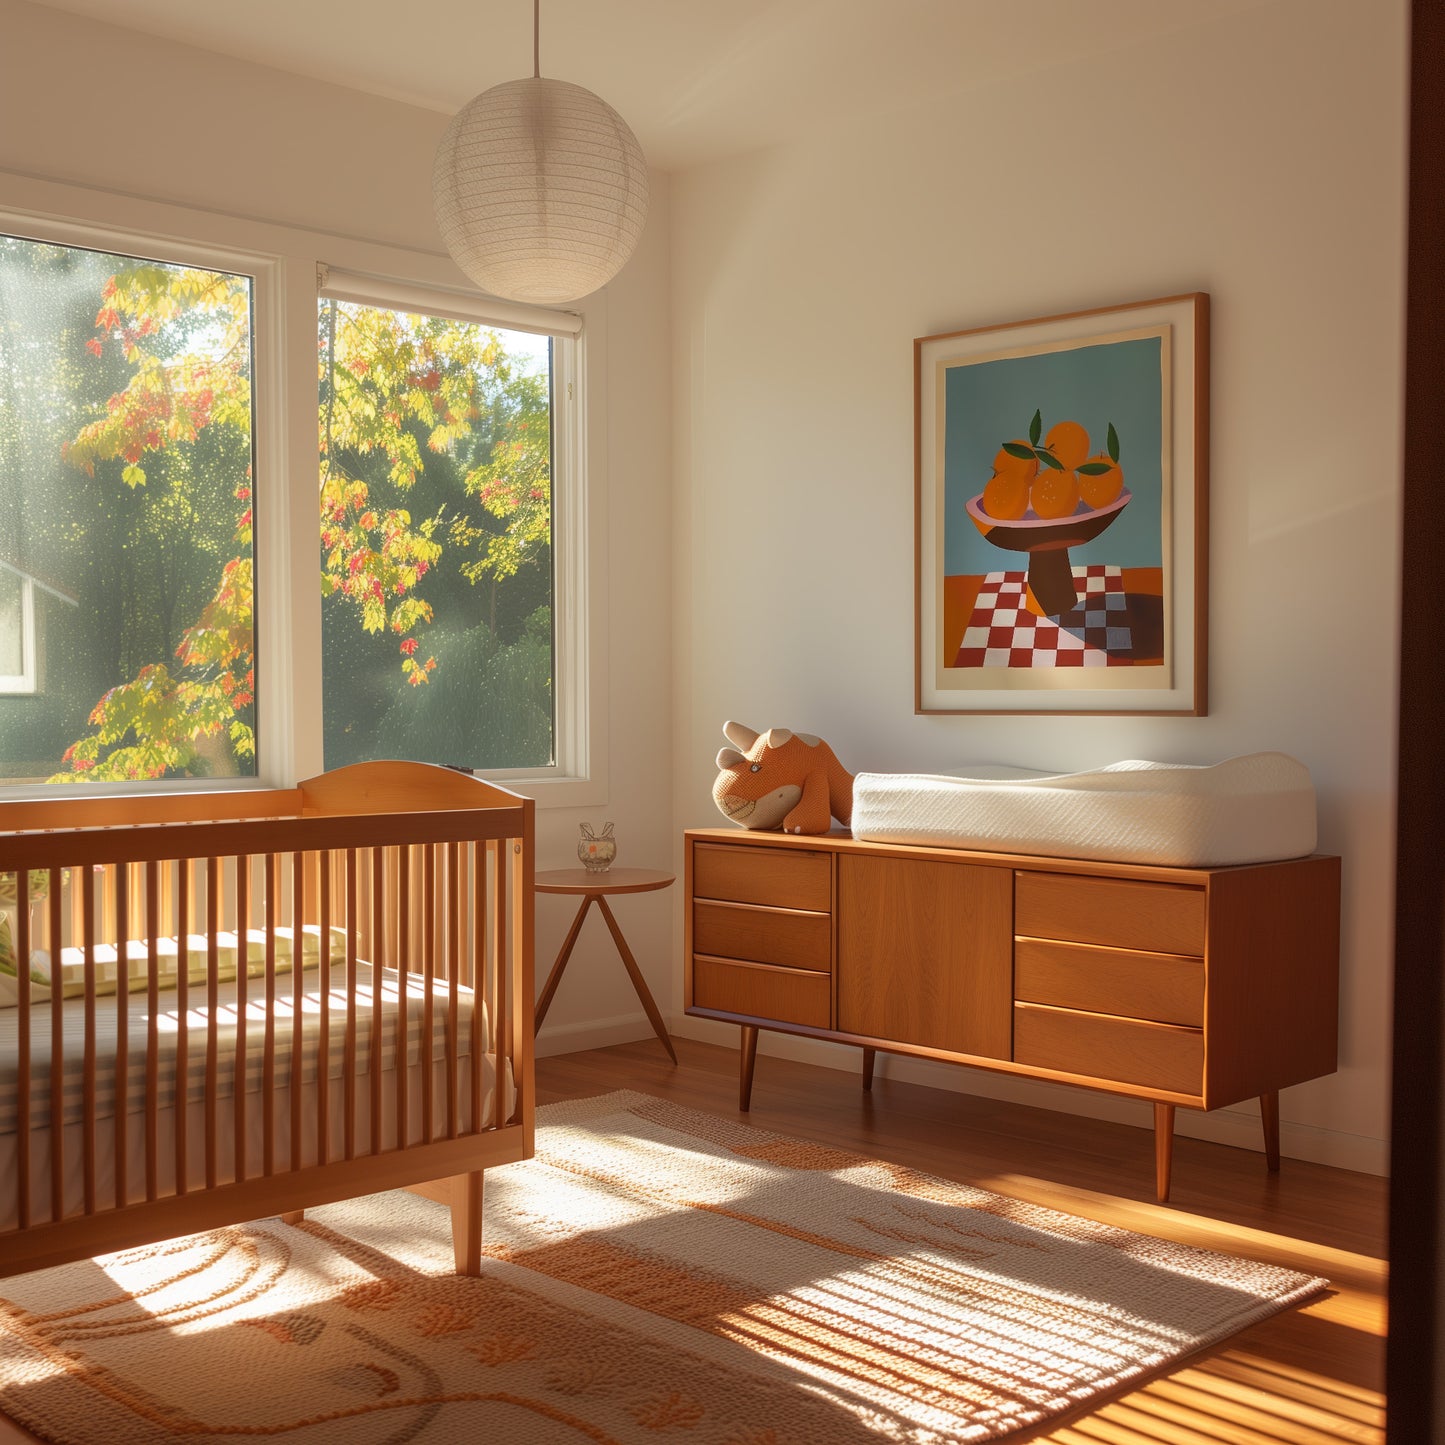 A cozy bedroom with mid-century modern furniture and autumn trees visible outside the window.